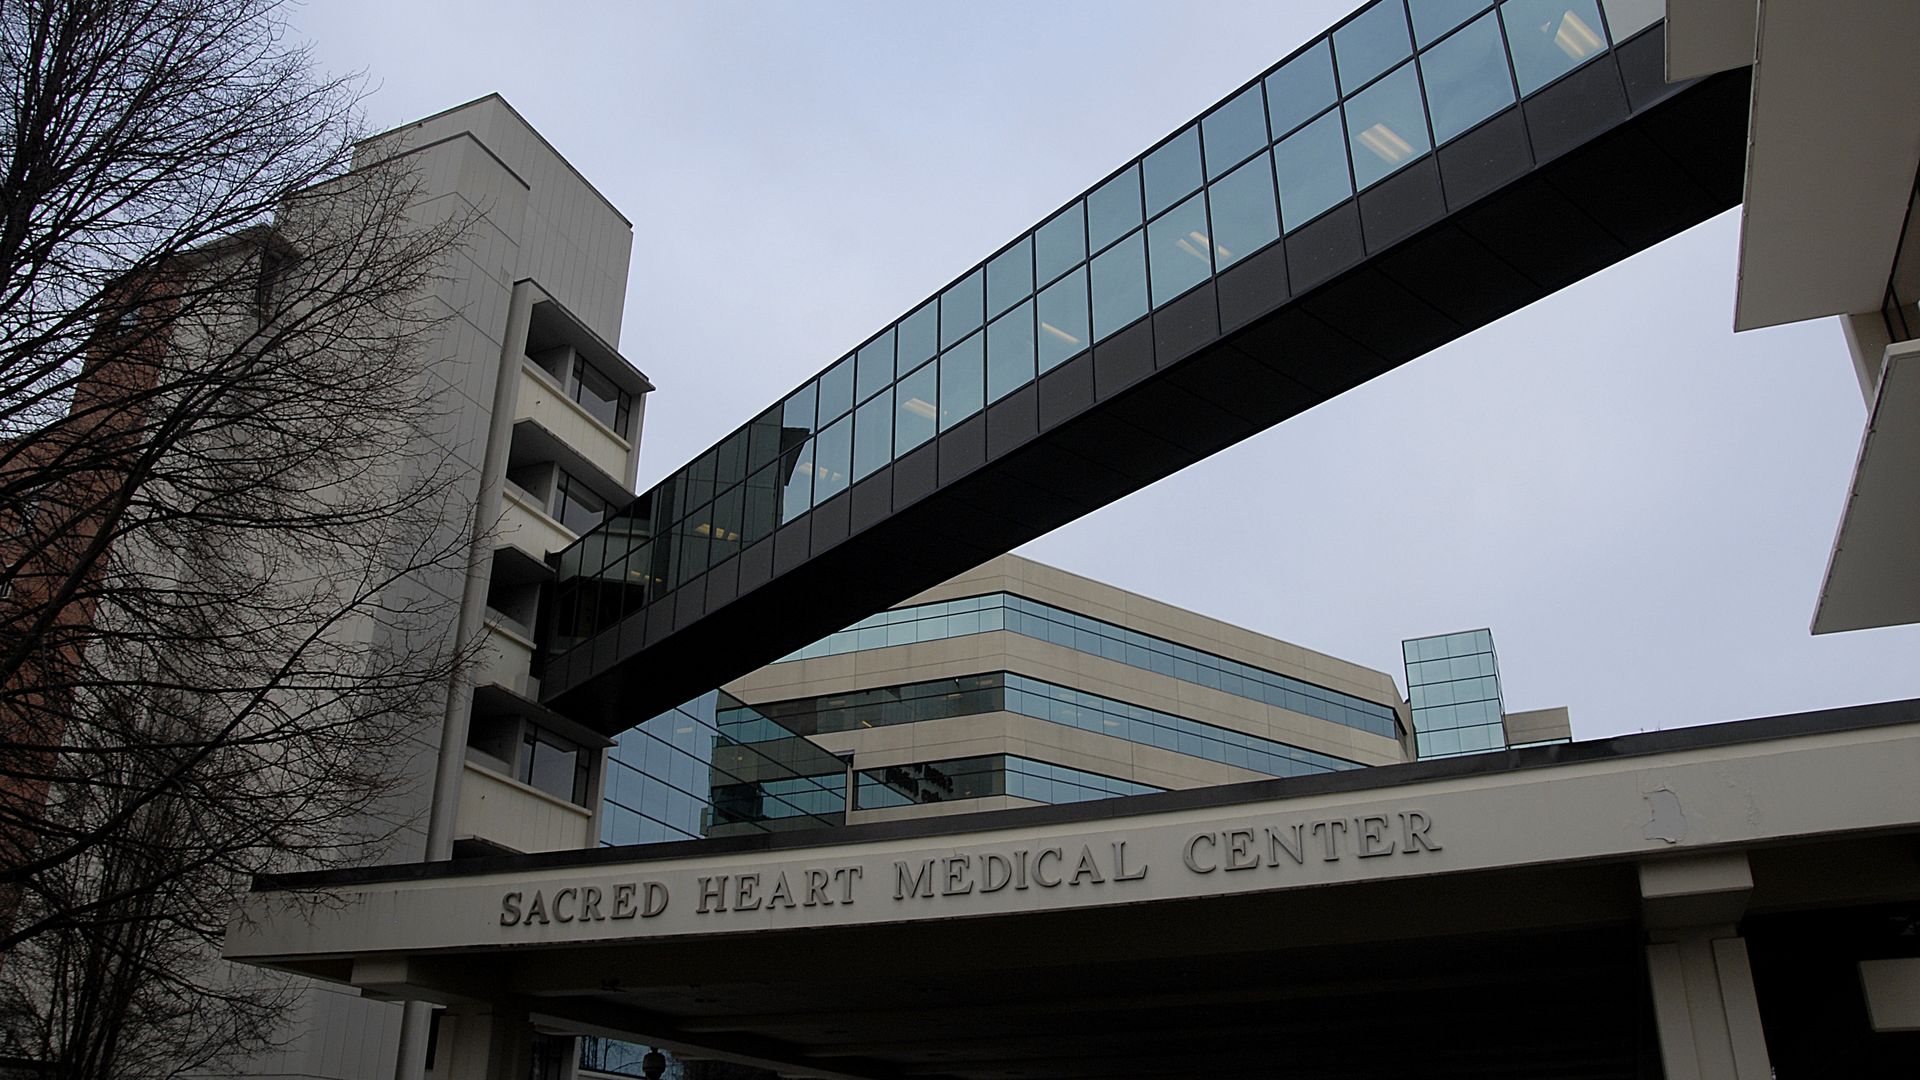 Providence Sacred Heart Medical Center building showing a connecting patient tunnel.